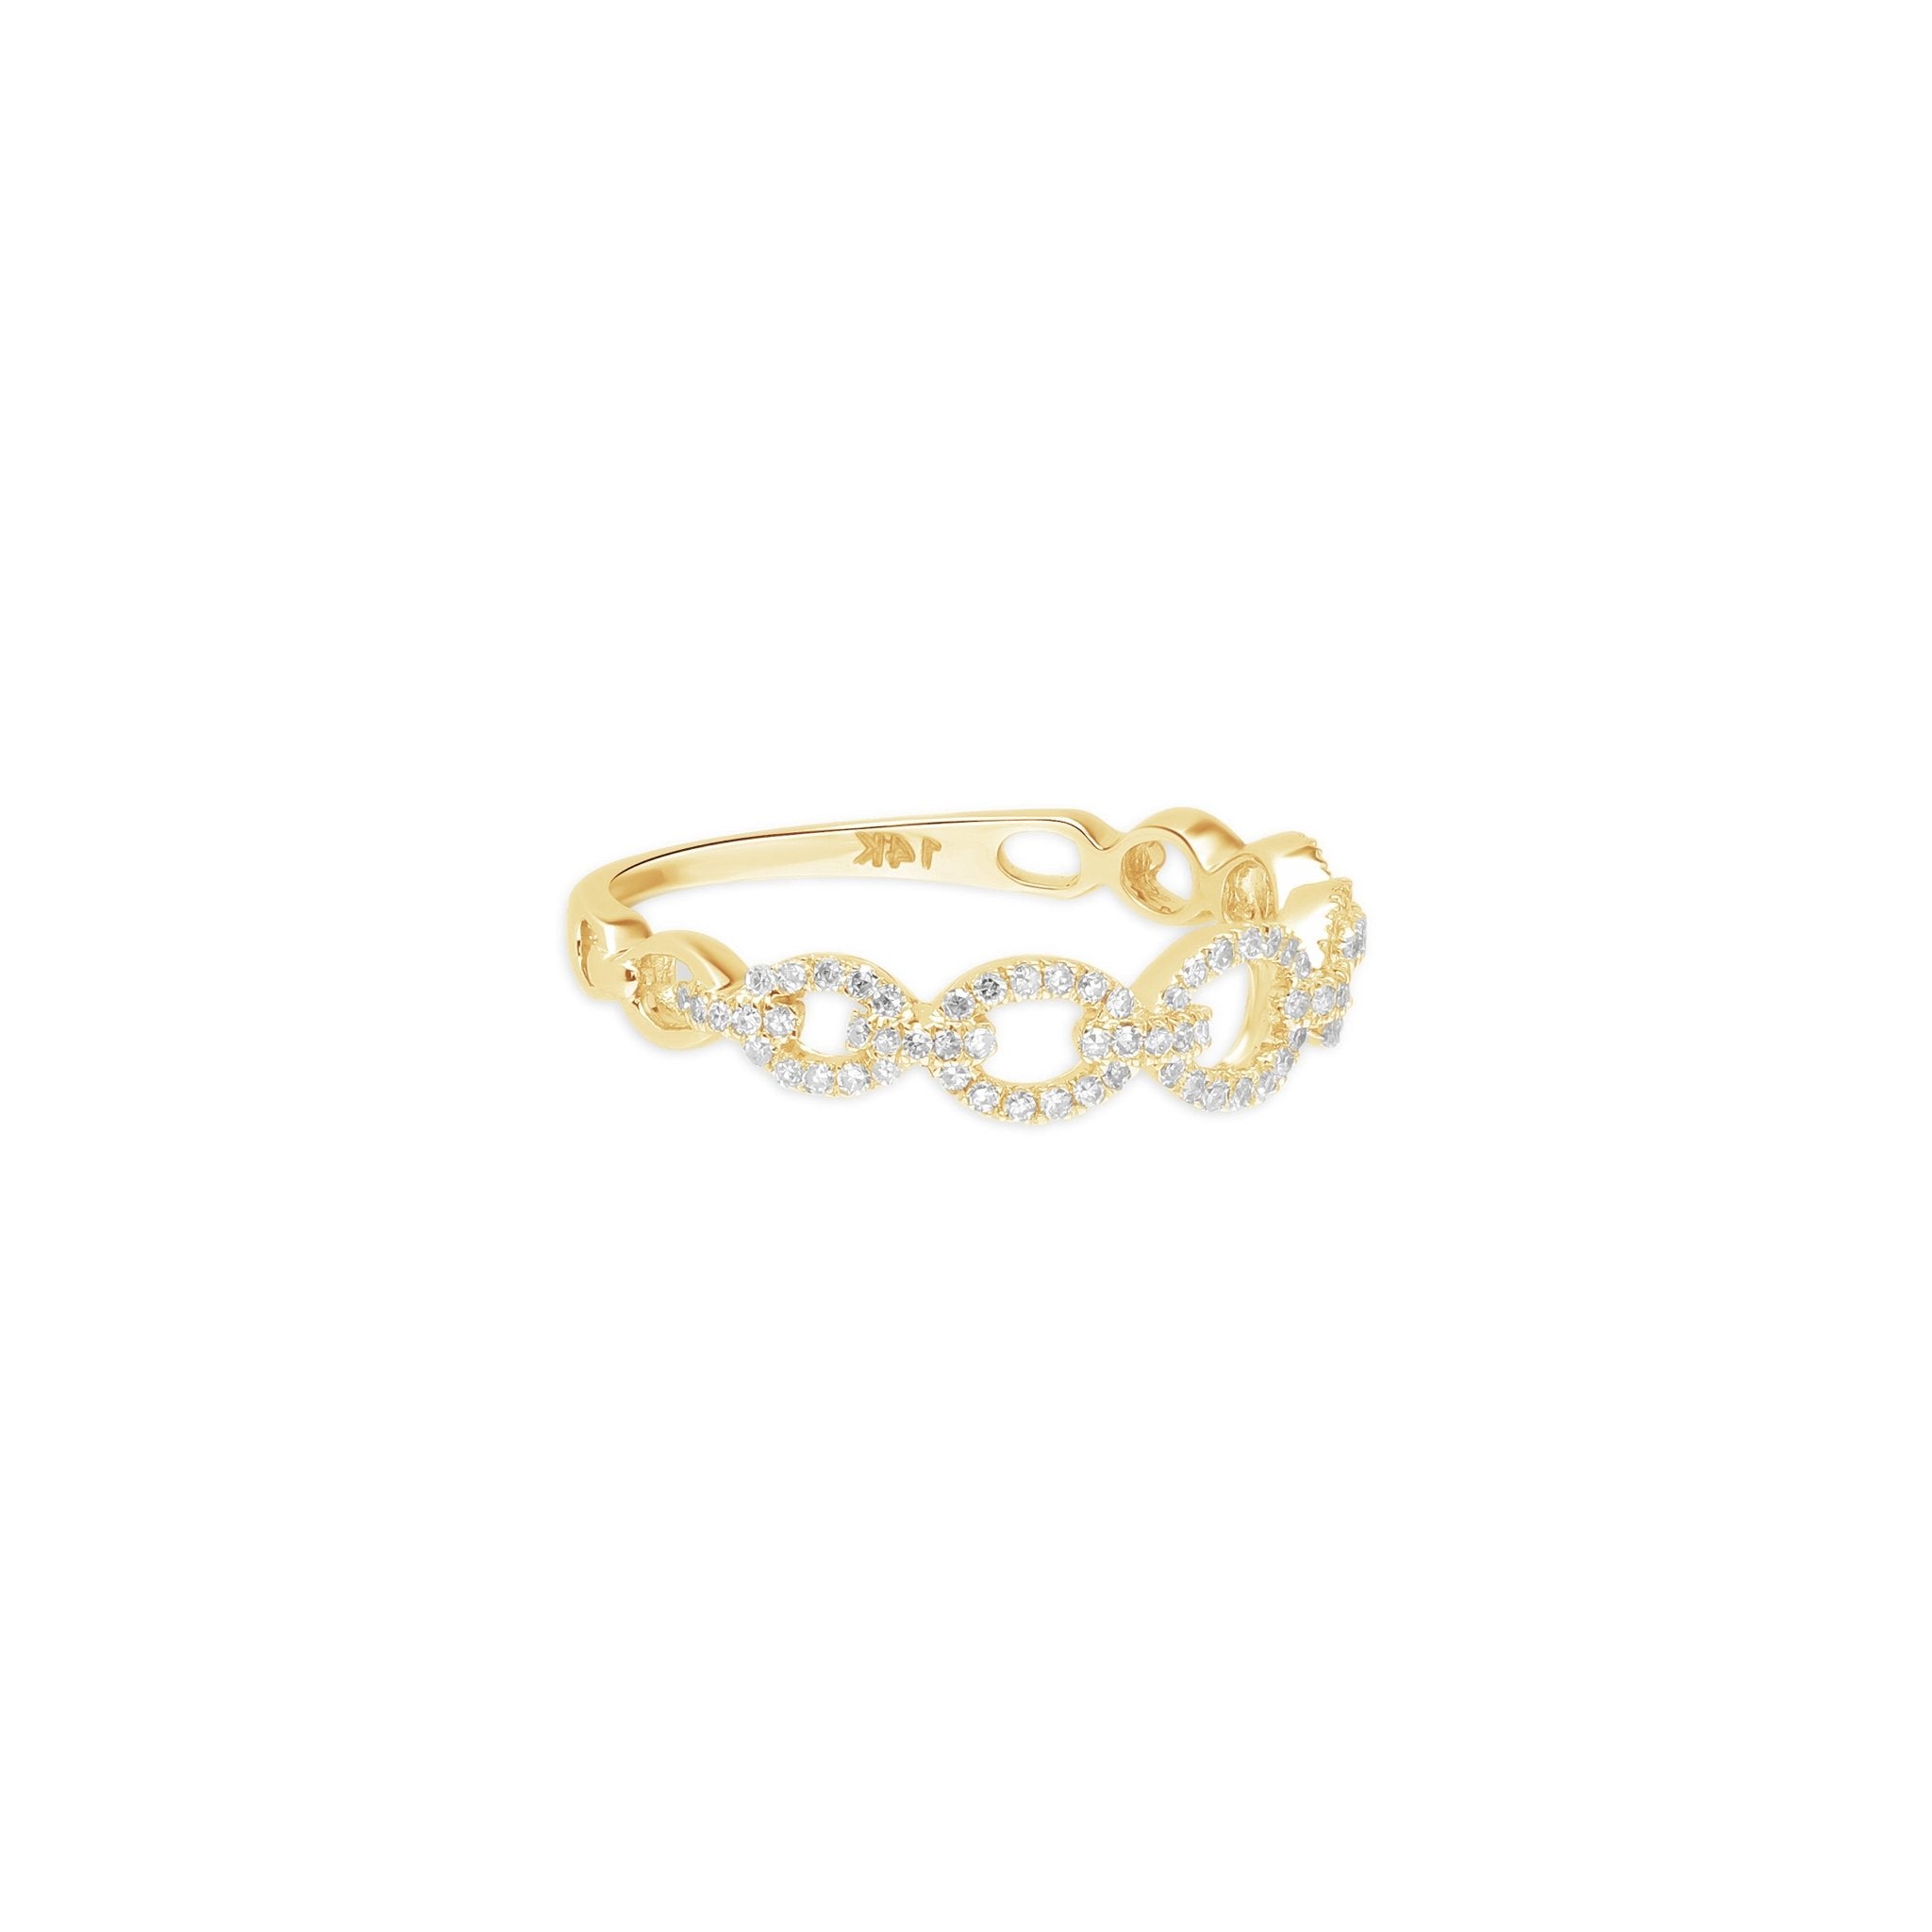 Diamond Chain Link Ring Rings Estella Collection #product_description# 17699 14k Band Colorless Gemstone #tag4# #tag5# #tag6# #tag7# #tag8# #tag9# #tag10# 6